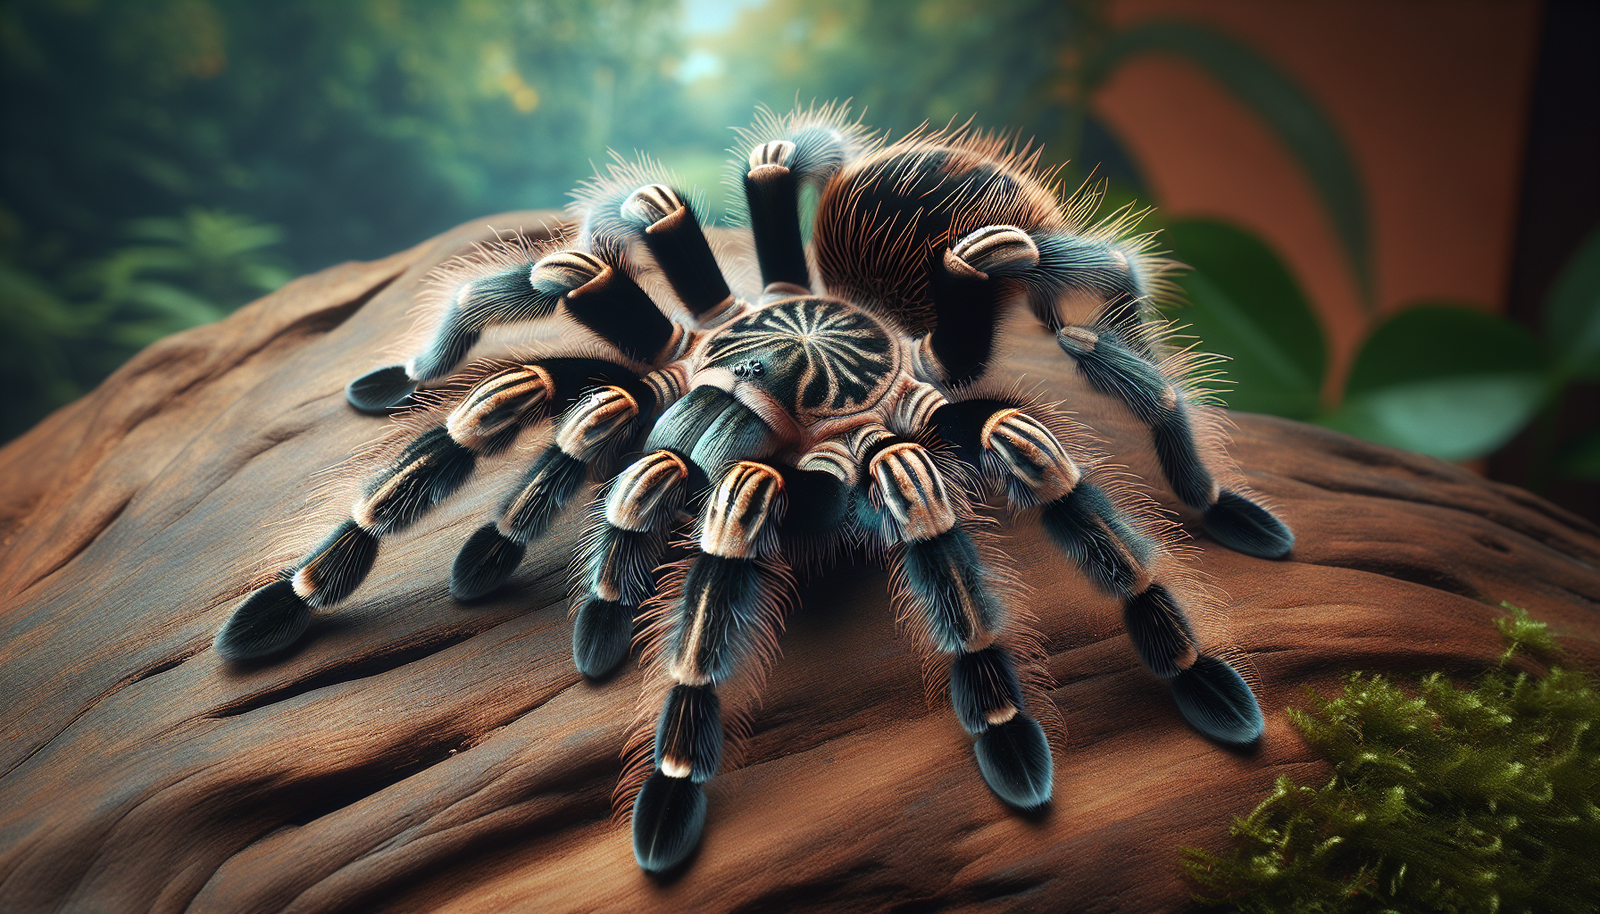 Can You Discuss The Intriguing Features Of The Delicate Venezuelan Funnel-web Tarantula?